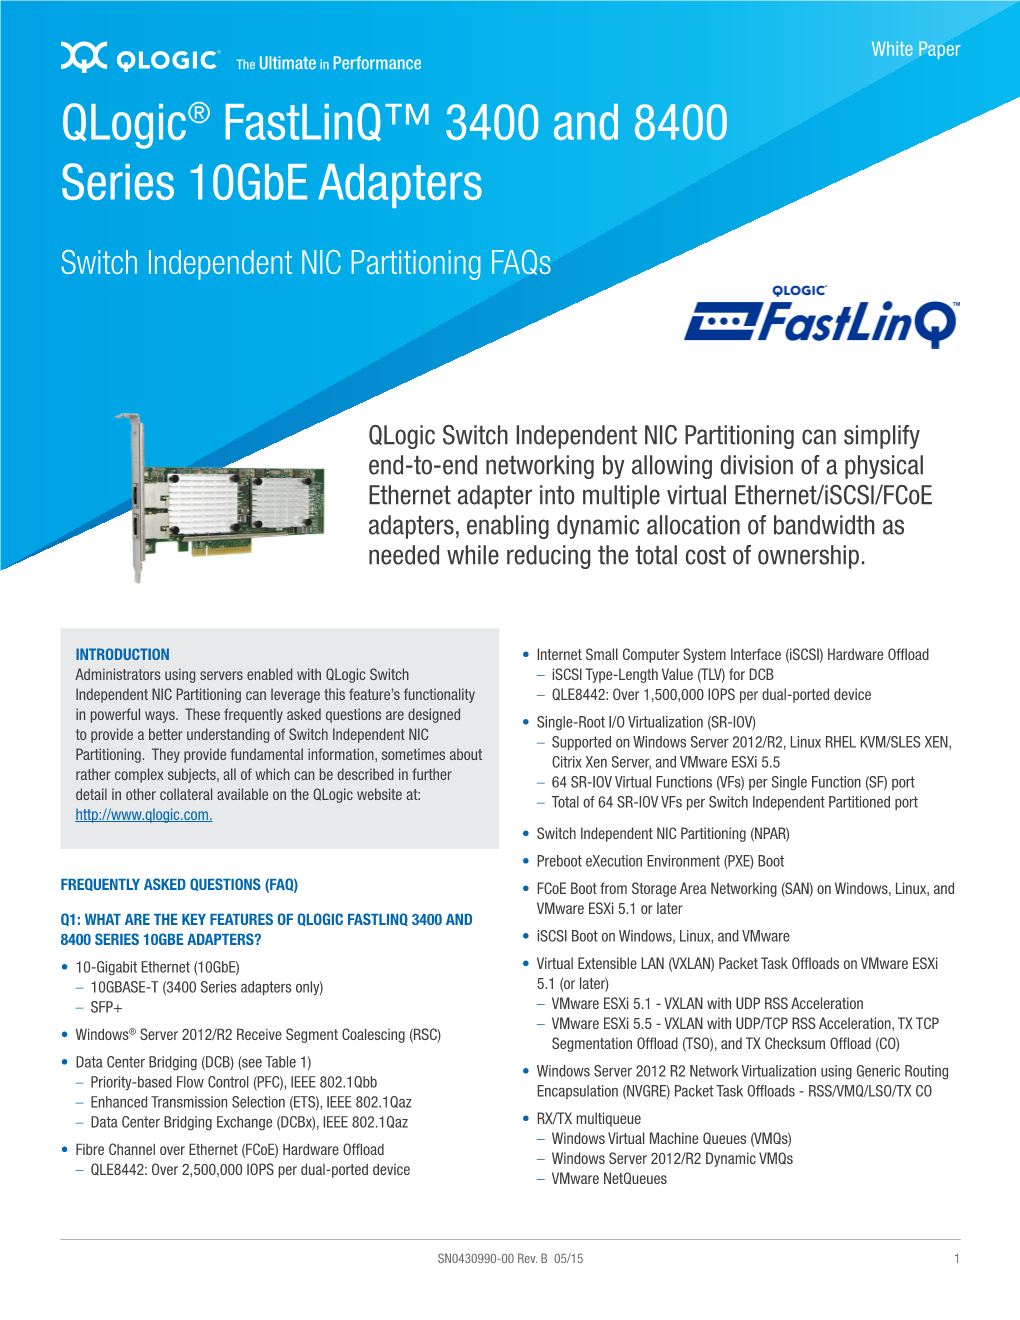 Qlogic® Fastlinq™ 3400 and 8400 Series 10Gbe Adapters